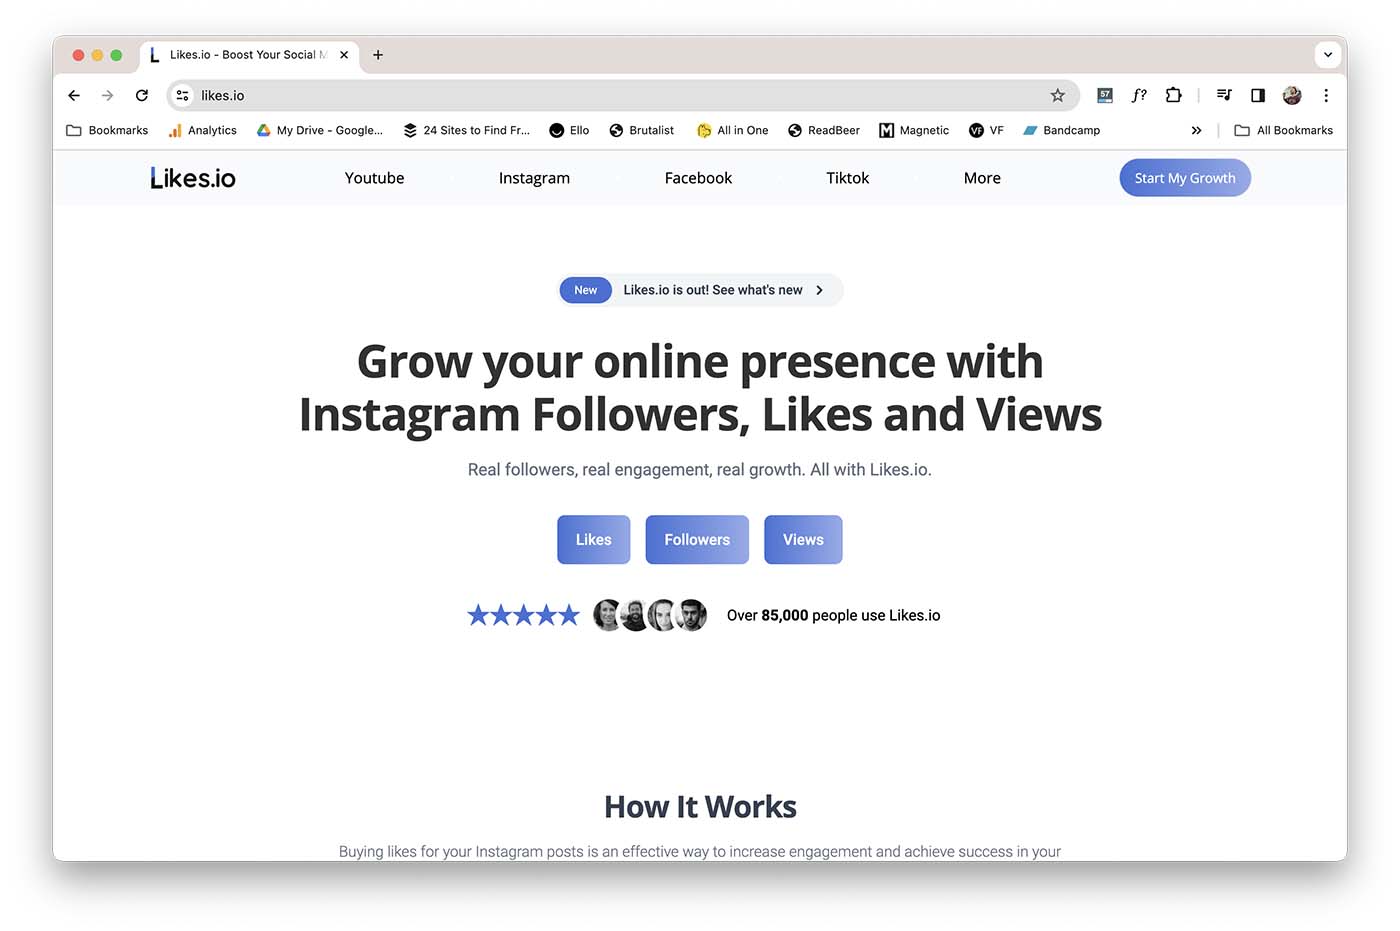 Likes.io: Trusted Source for Quality Followers